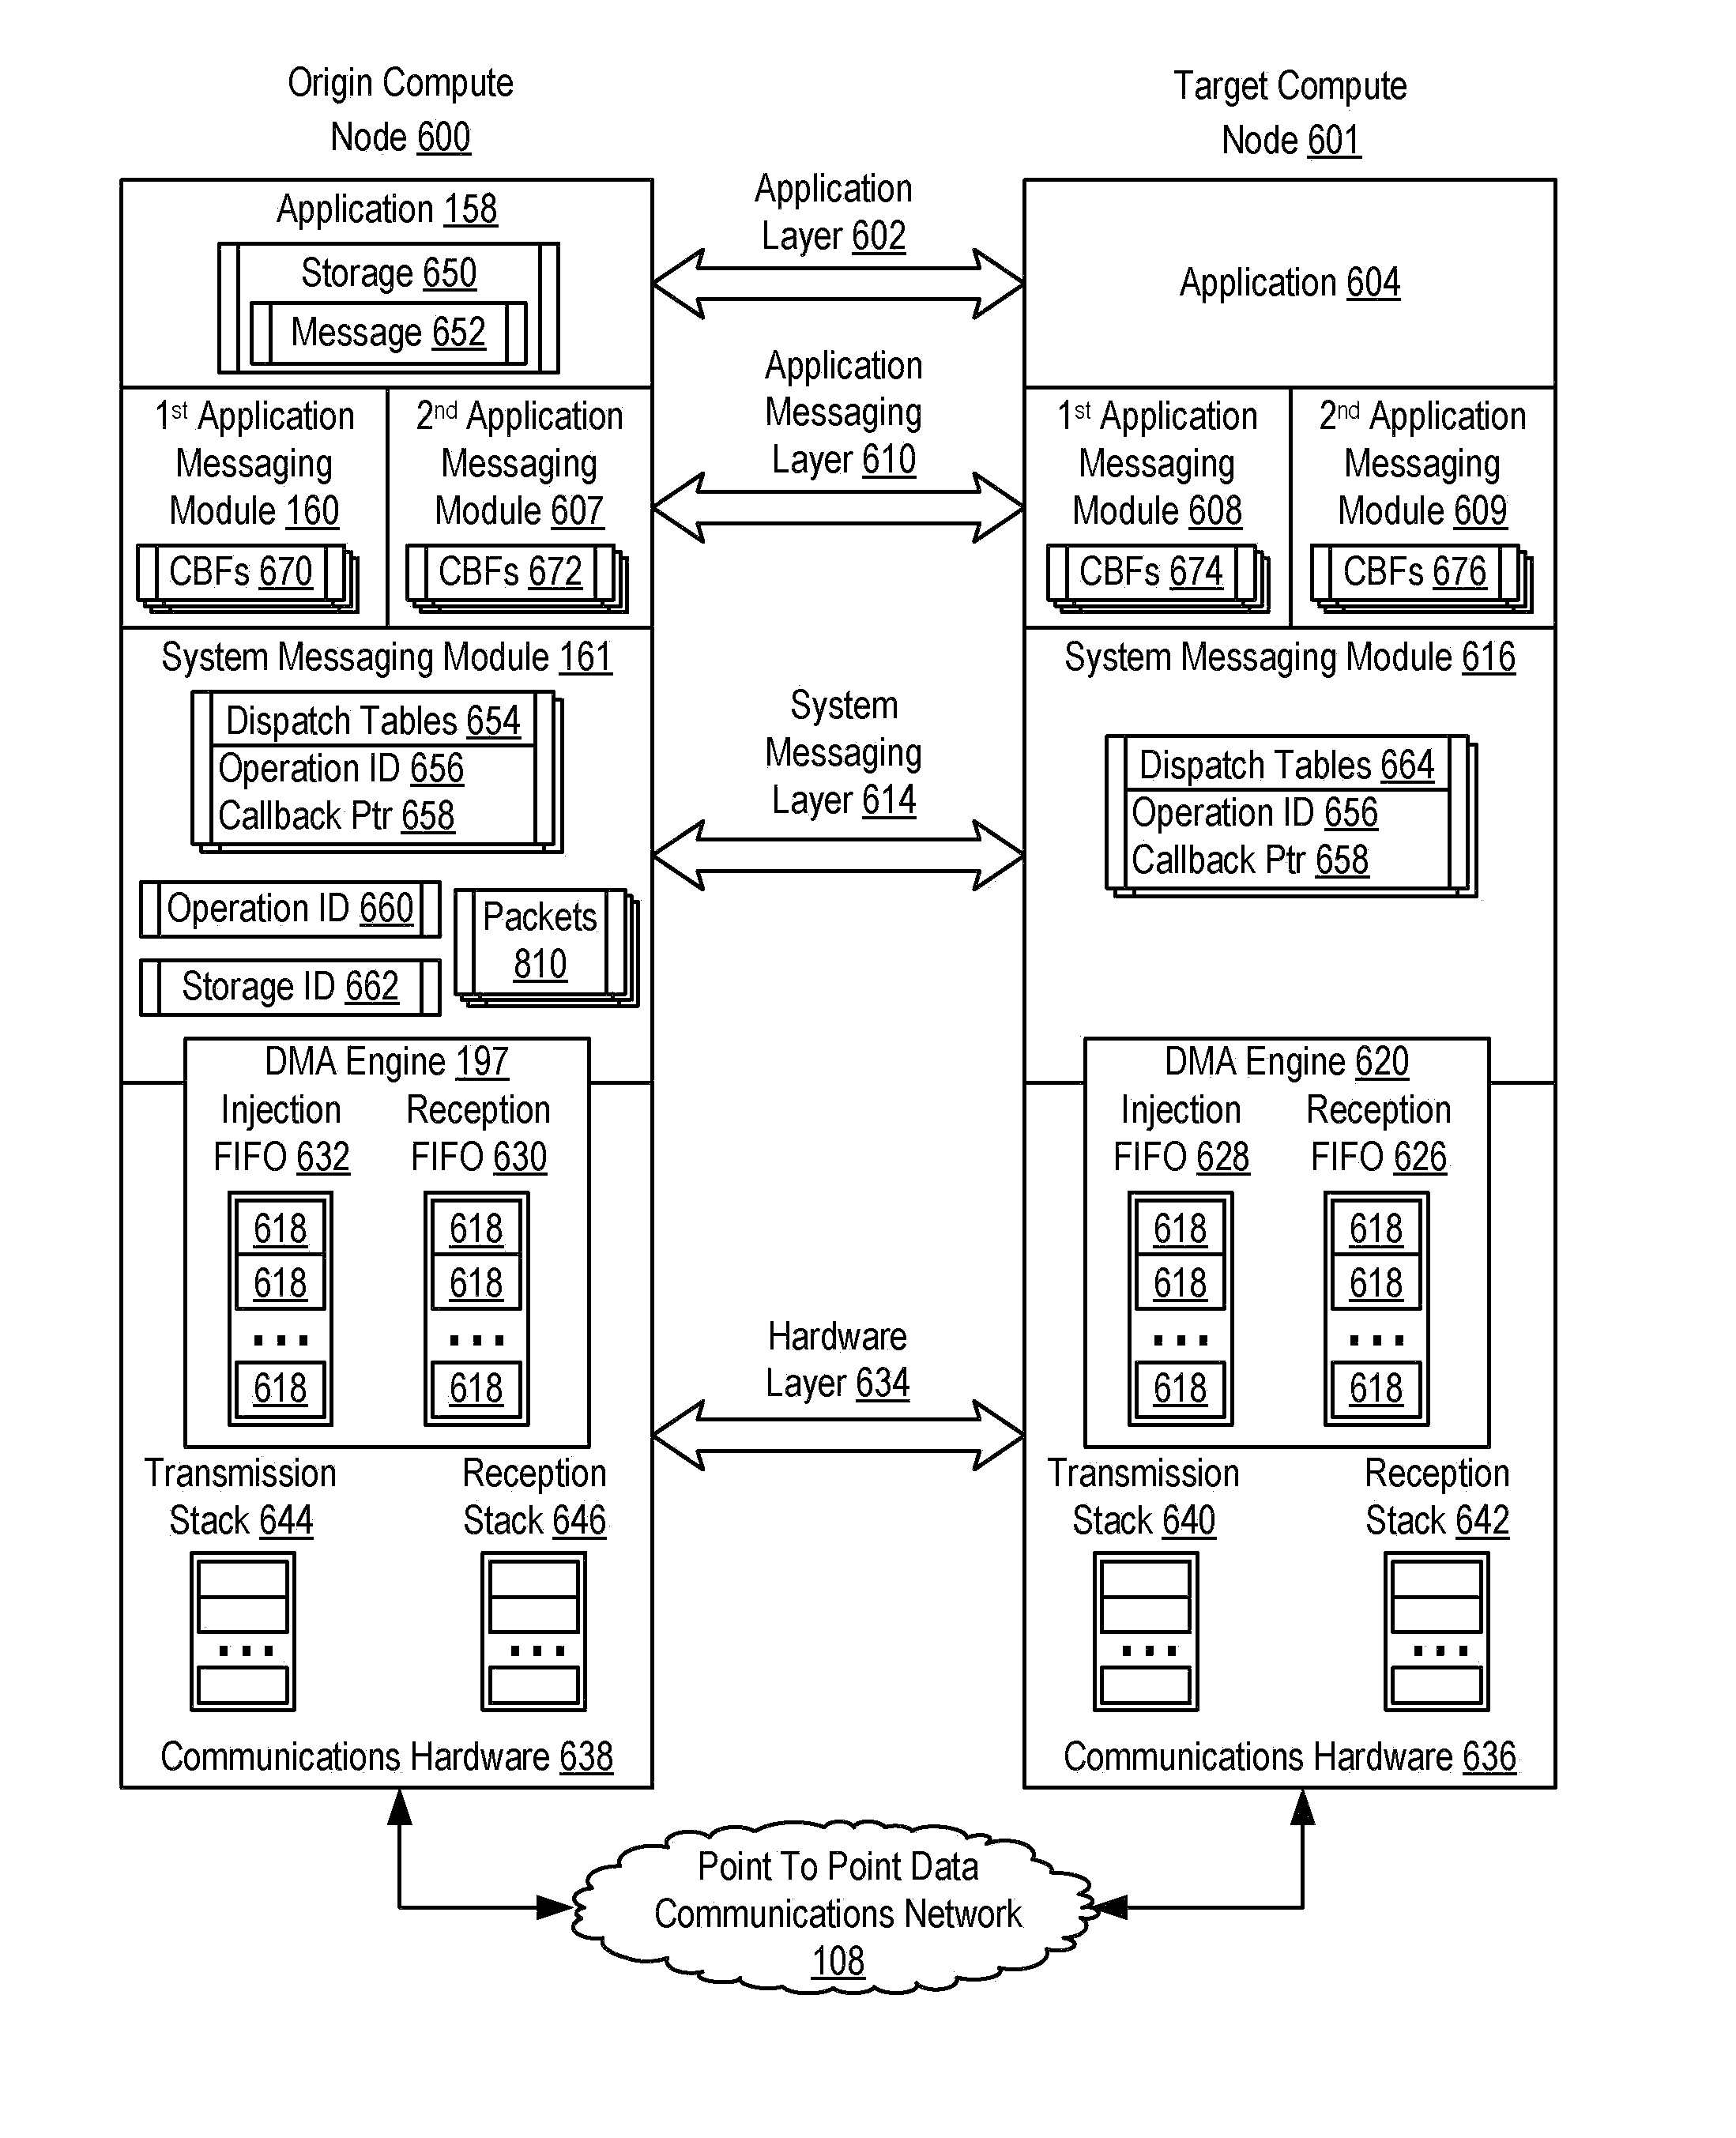 Dispatching Packets on a Global Combining Network of a Parallel Computer